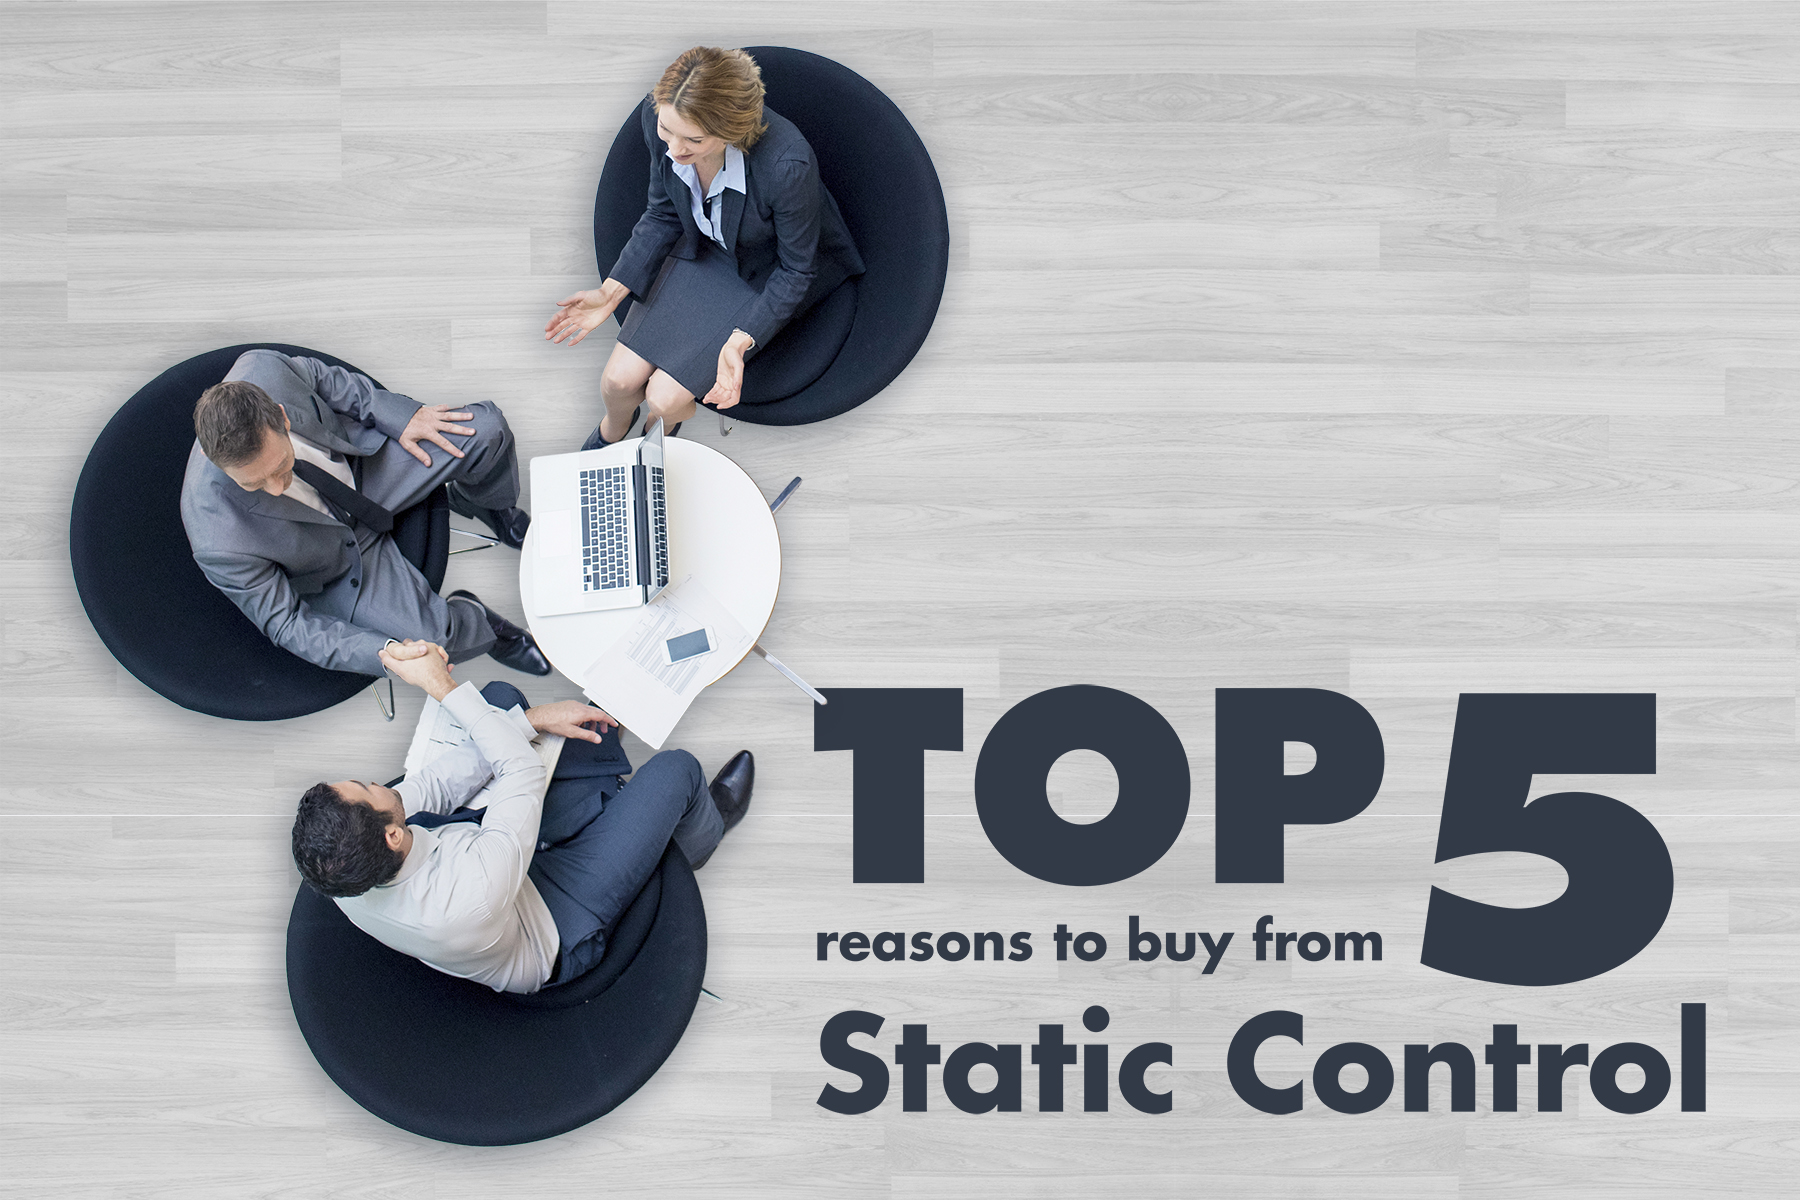 Top 5 Reasons to Buy from Static Control